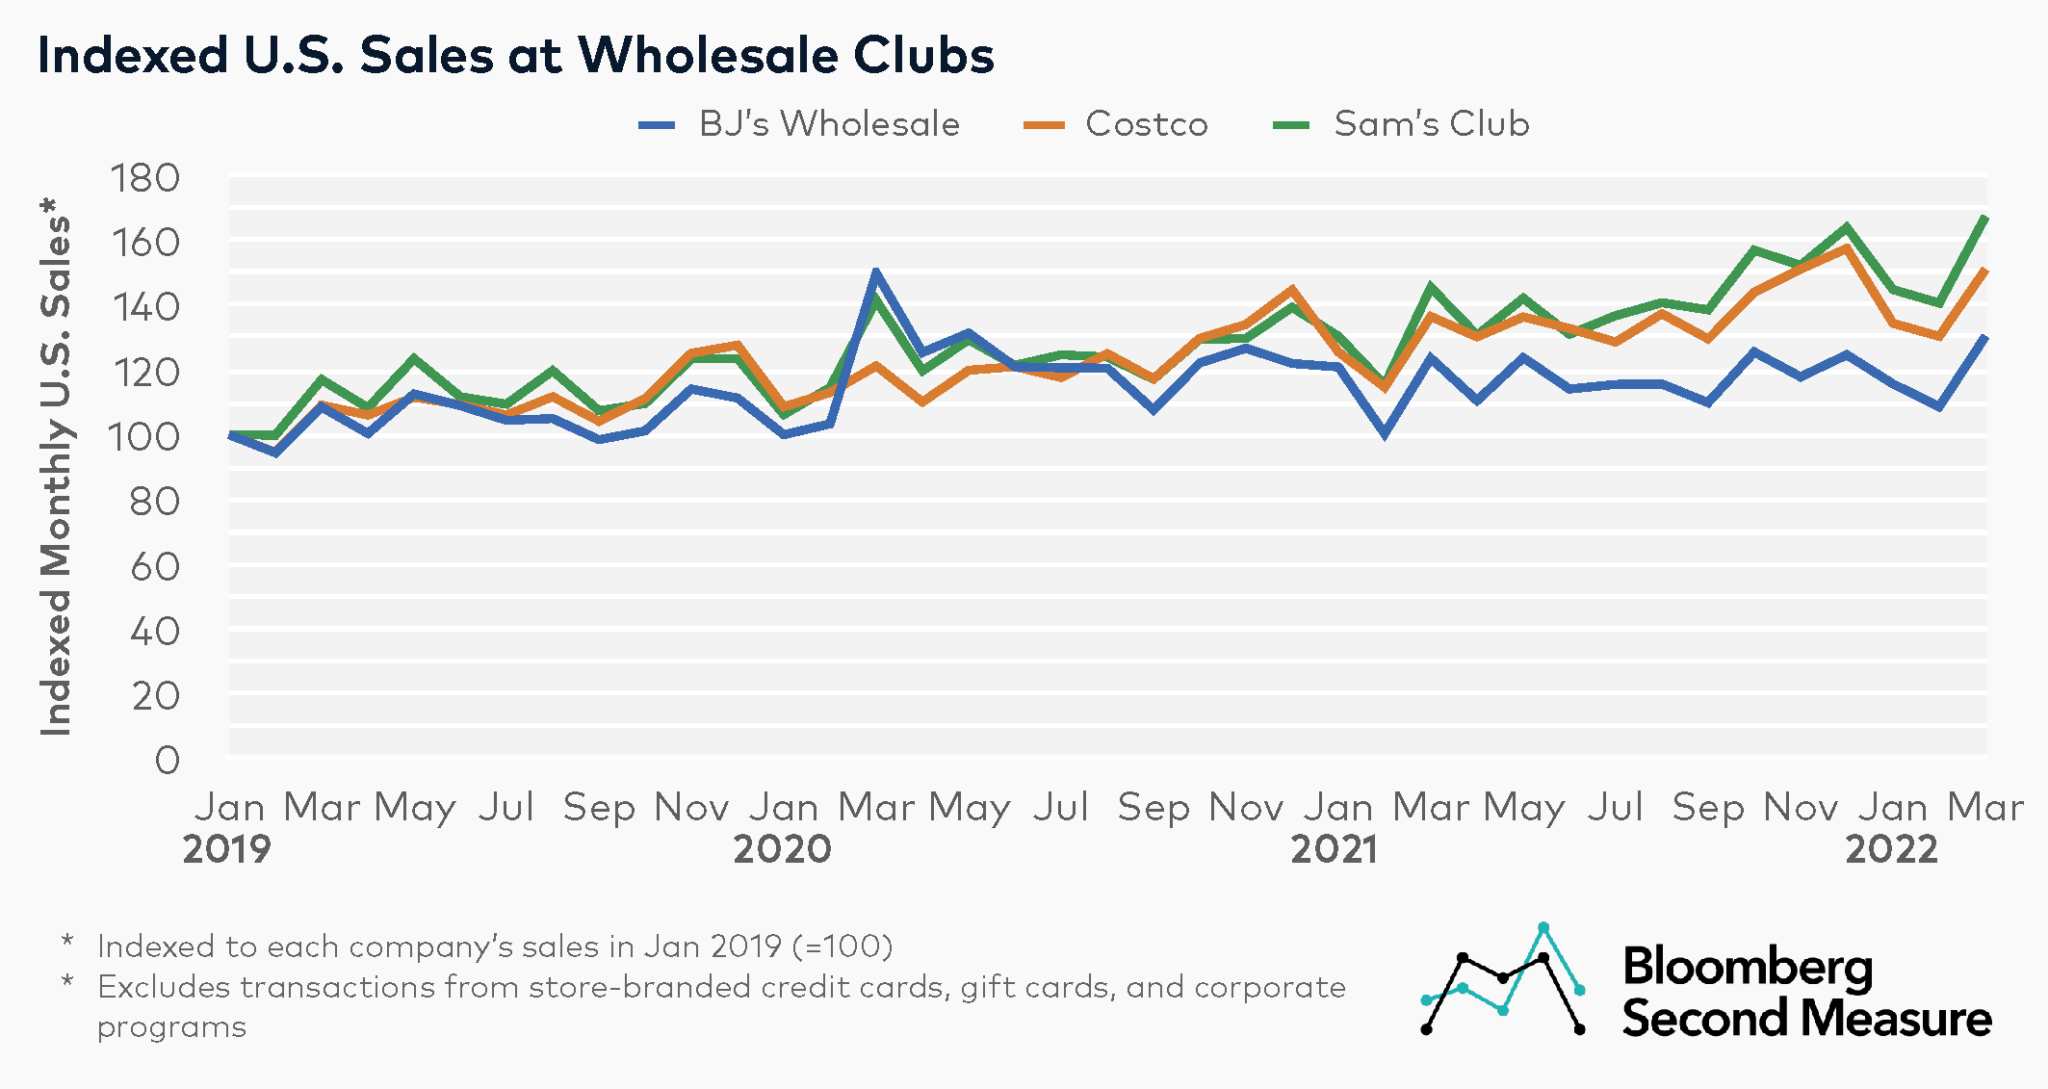 Two years into the pandemic, consumer spending still growing at Costco